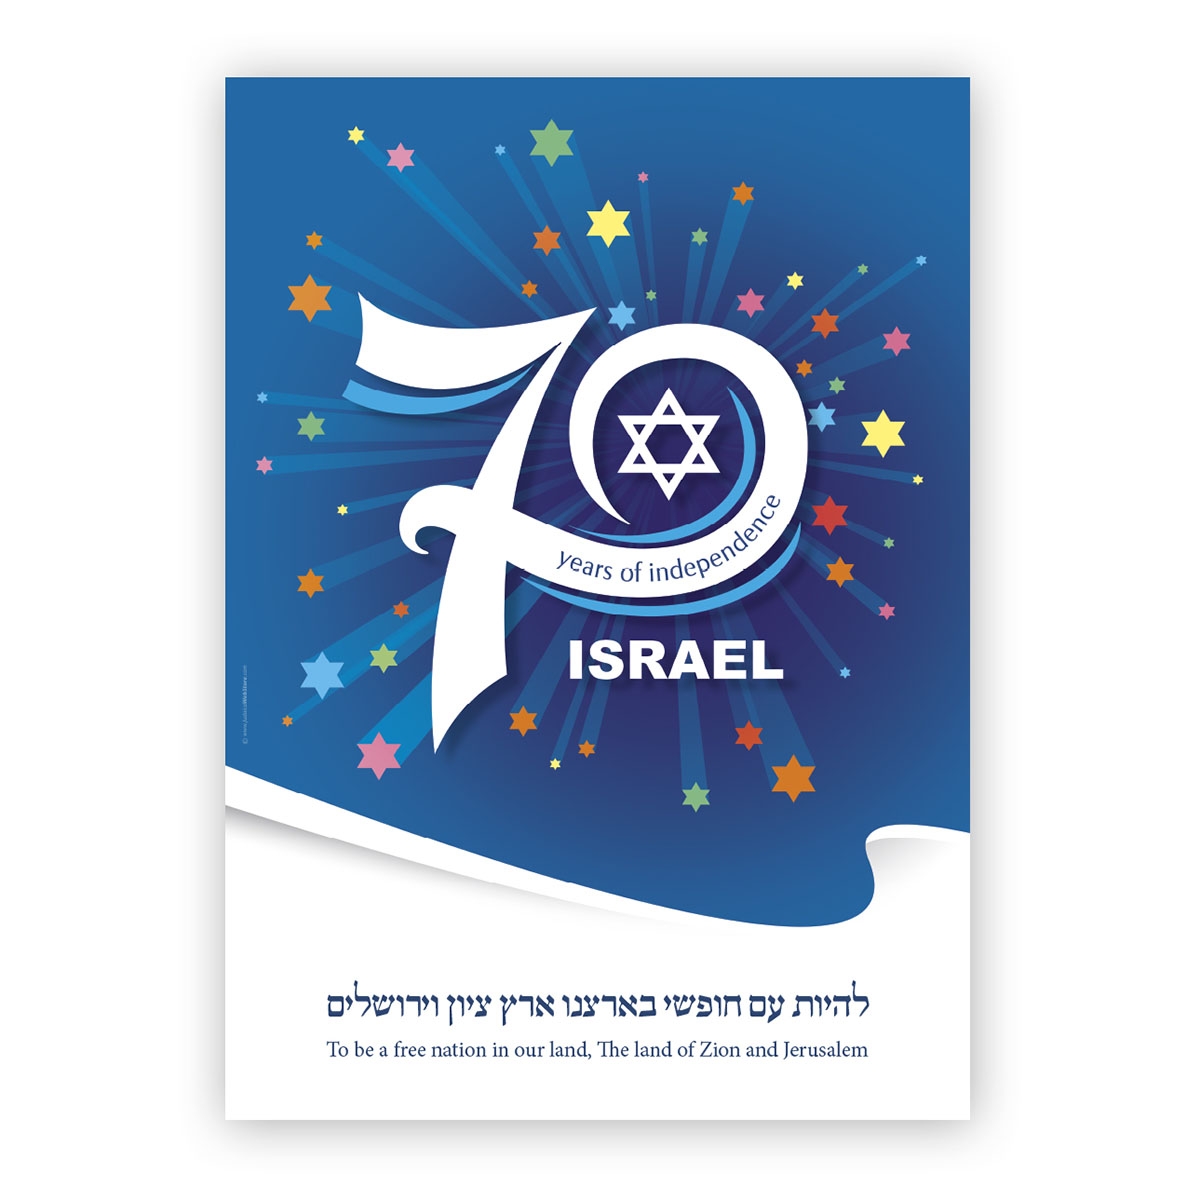 Israel Poster – 70 Years of Independence   - 1